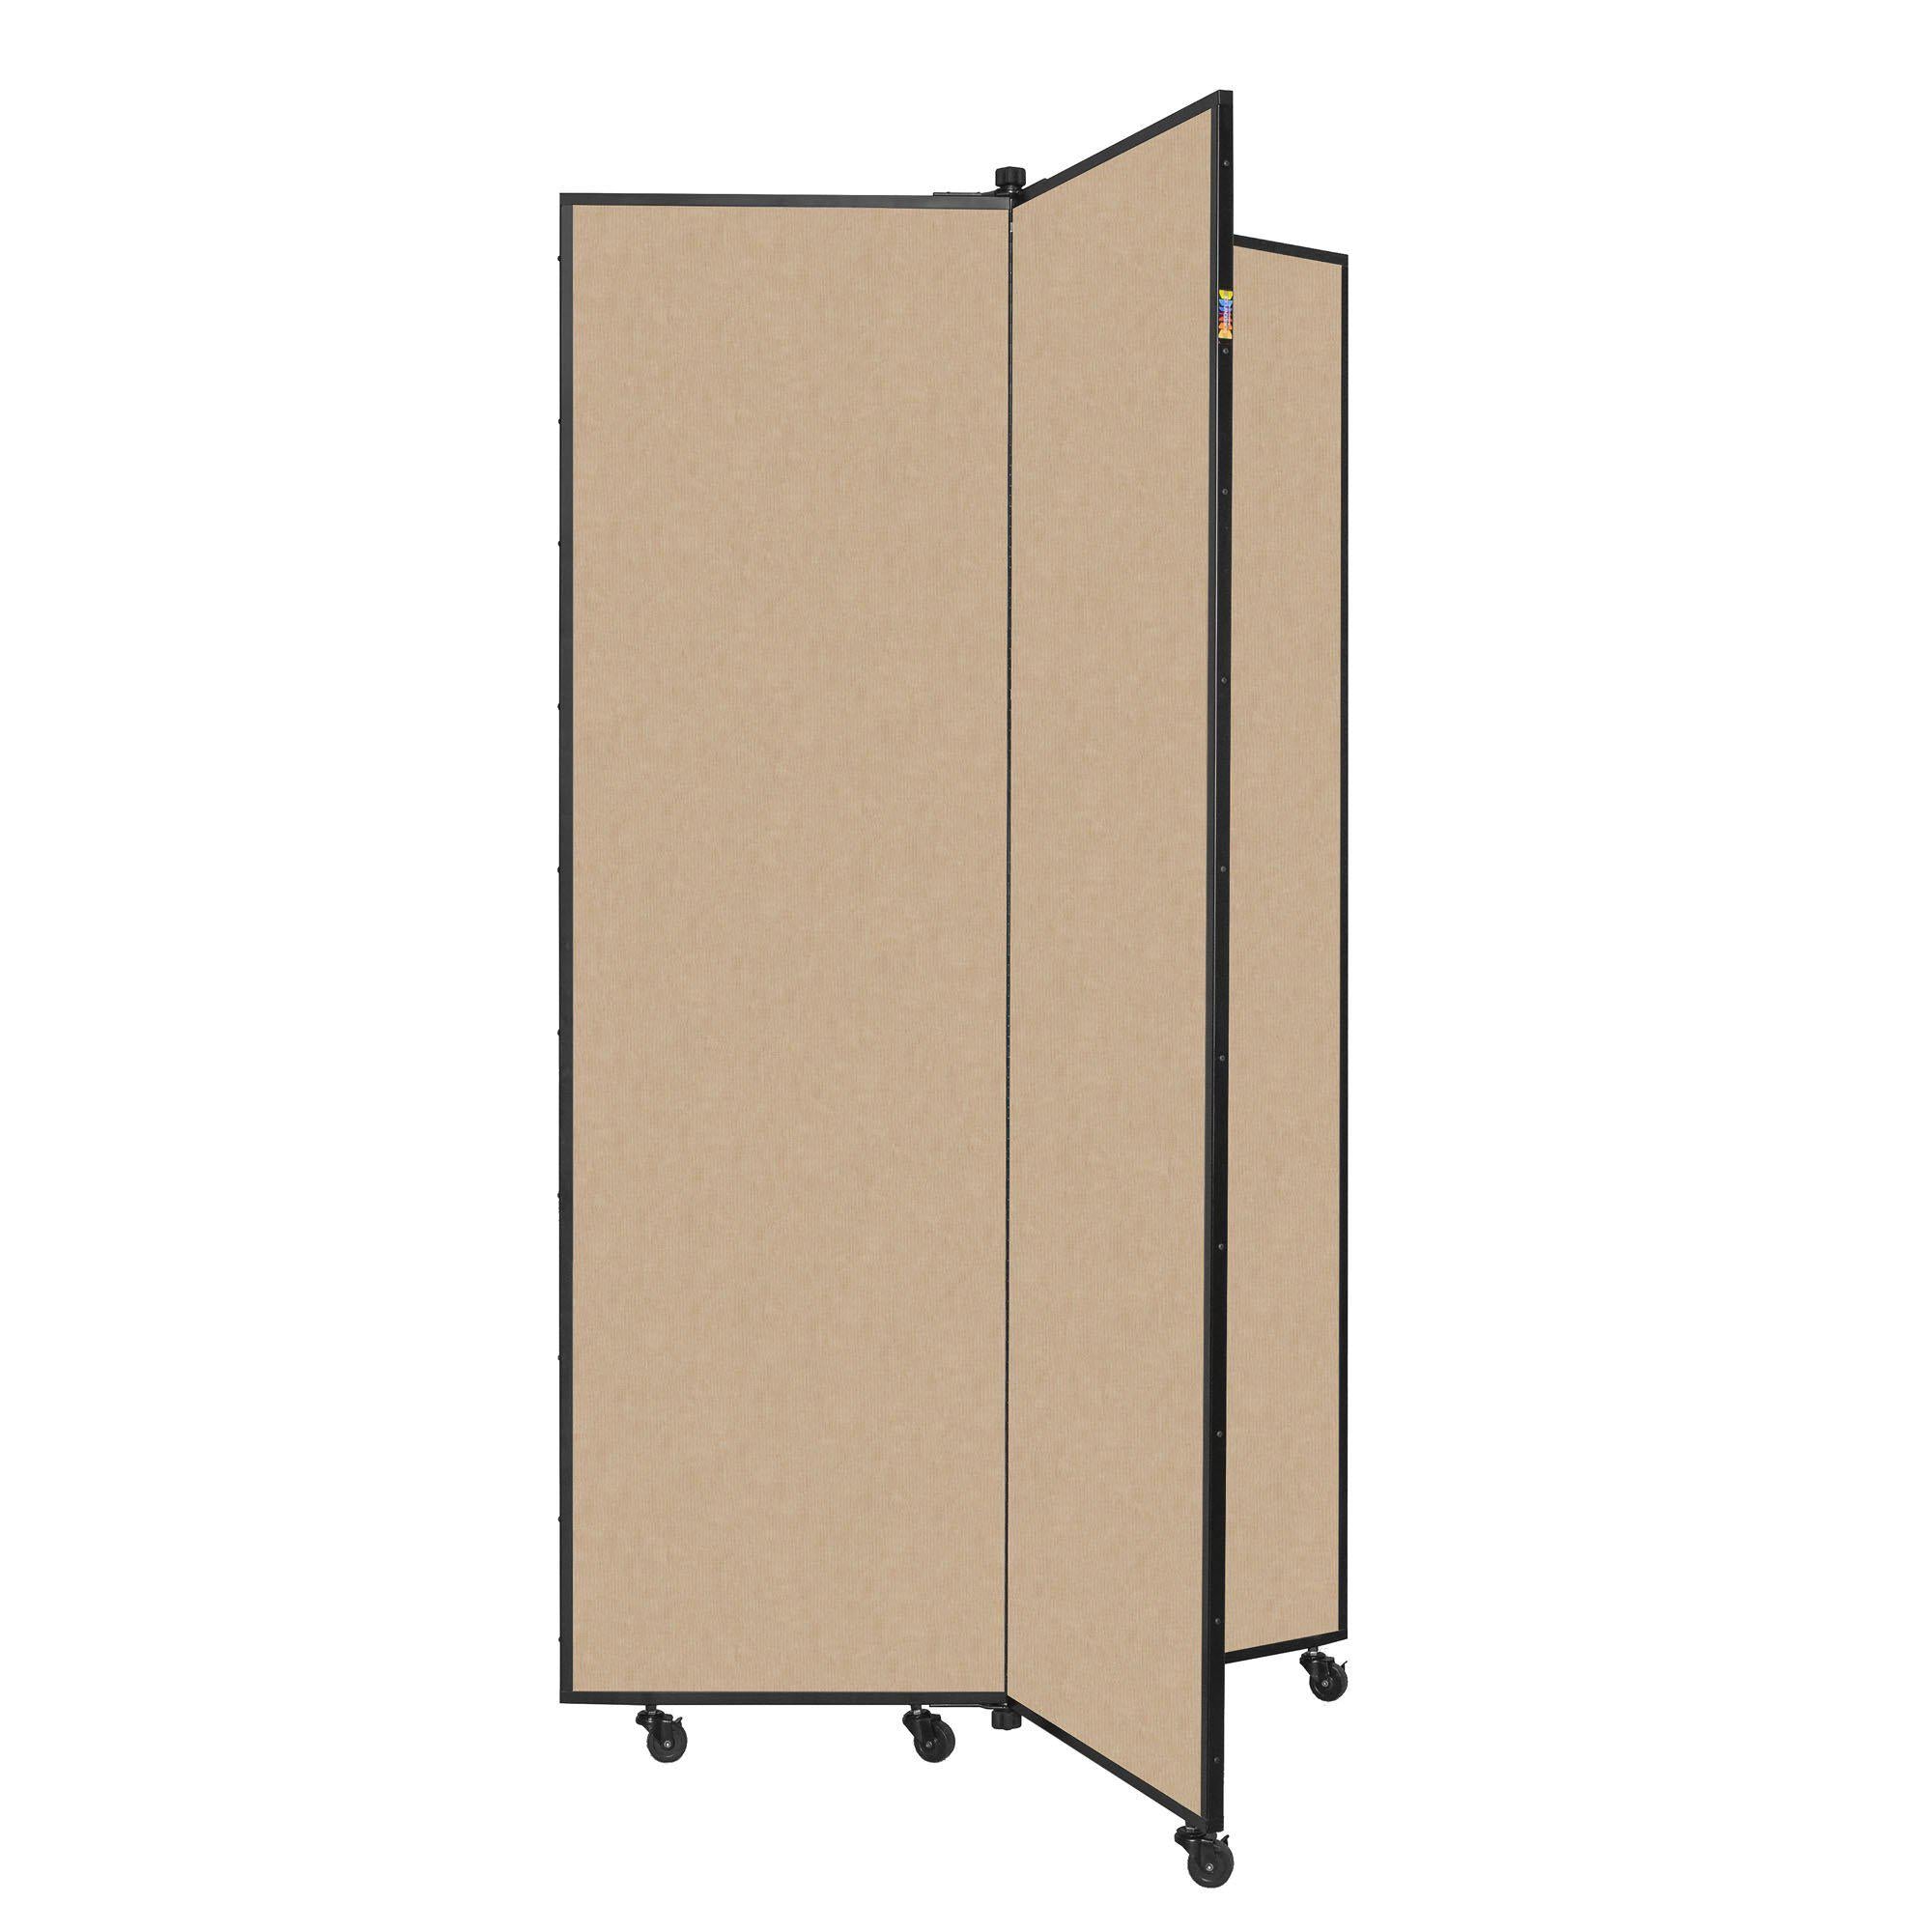 Screenflex Display Tower-Partitions & Display Panels-5' 9"-3-